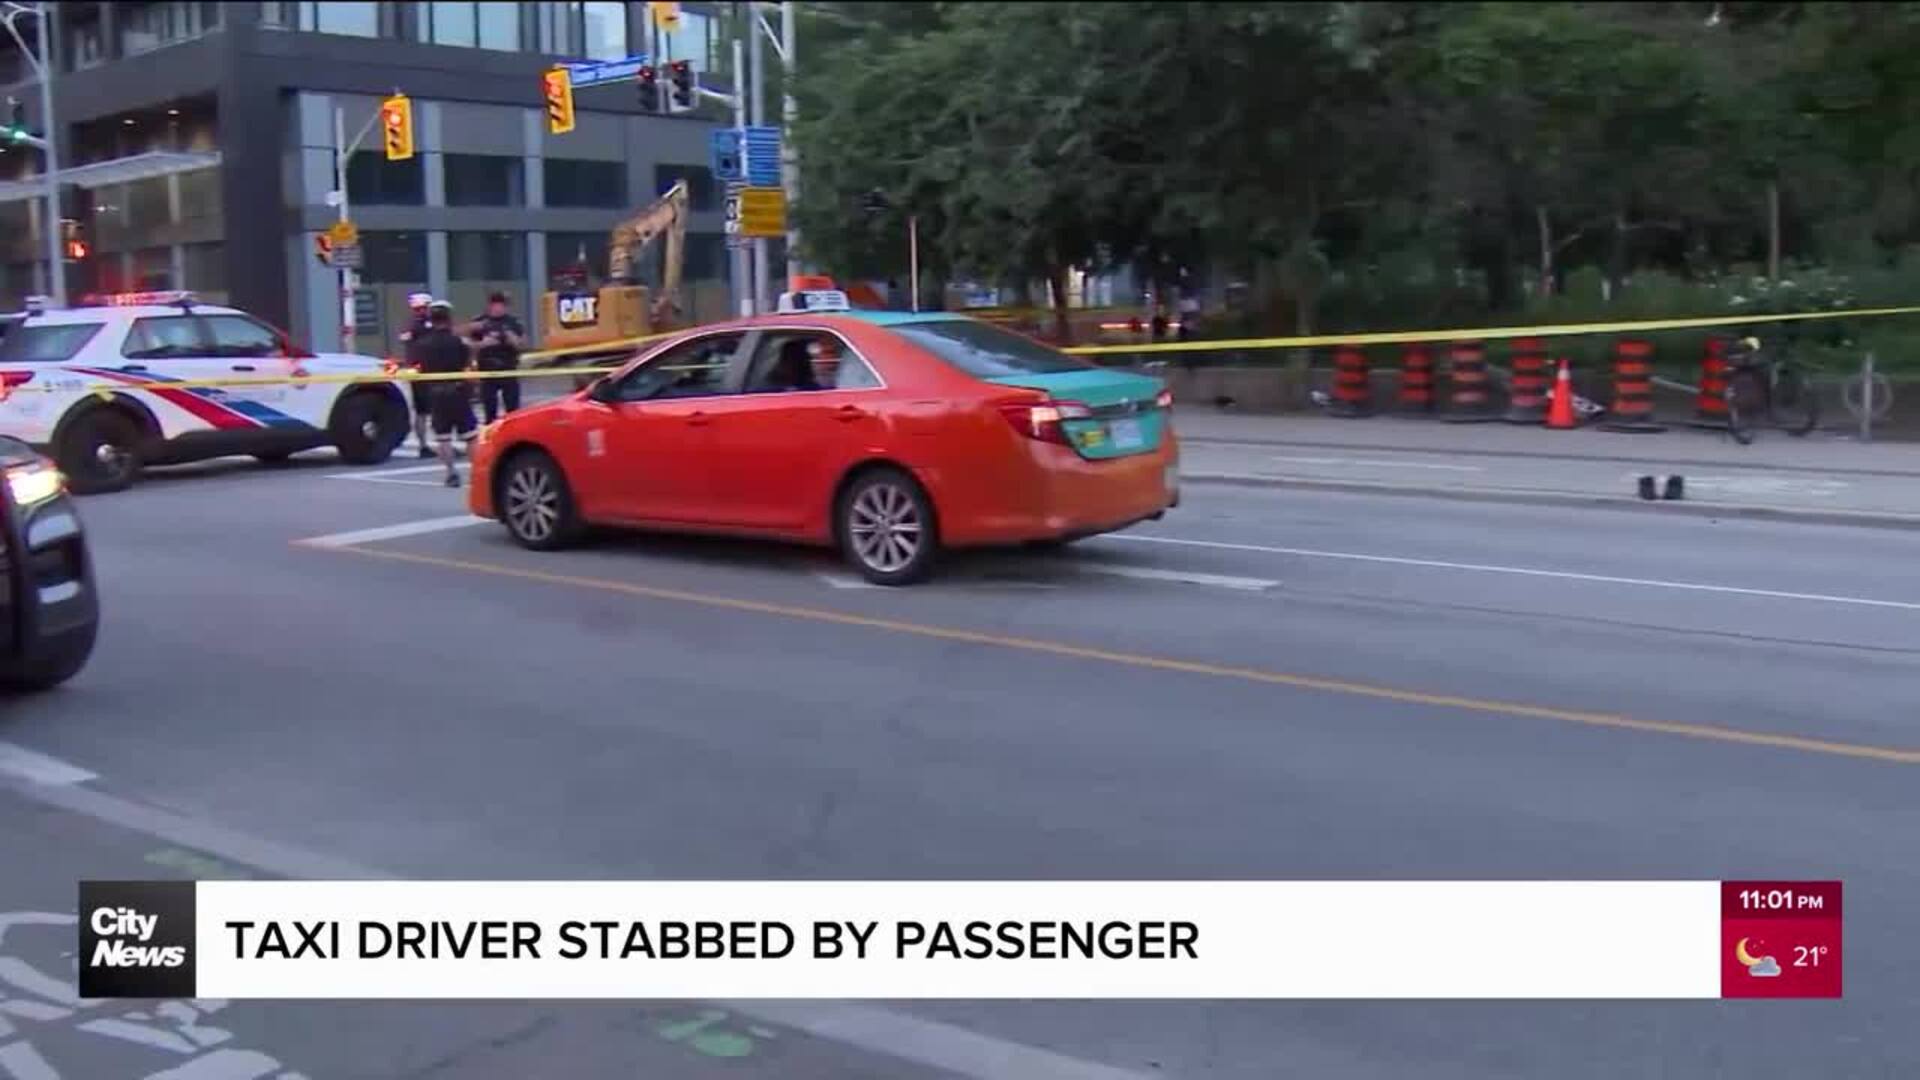 Taxi driver stabbed by passenger in Toronto: police